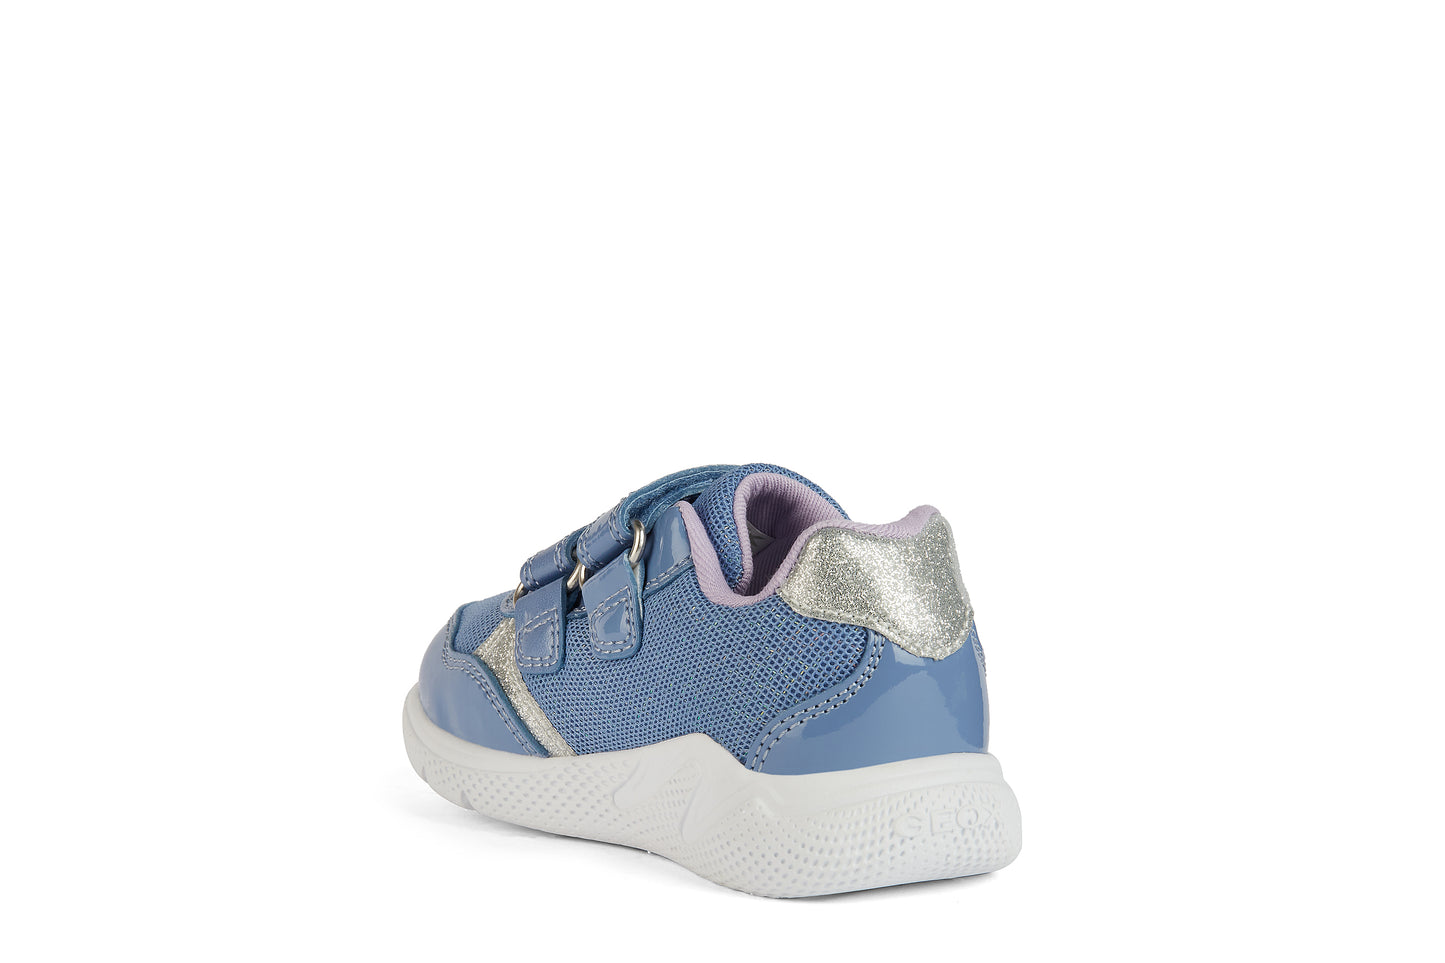 A girls trainer by Geox, style B Sprintye, in blue with silver glitter trim, wing detail and double velcro fastening. Angled view of left side.